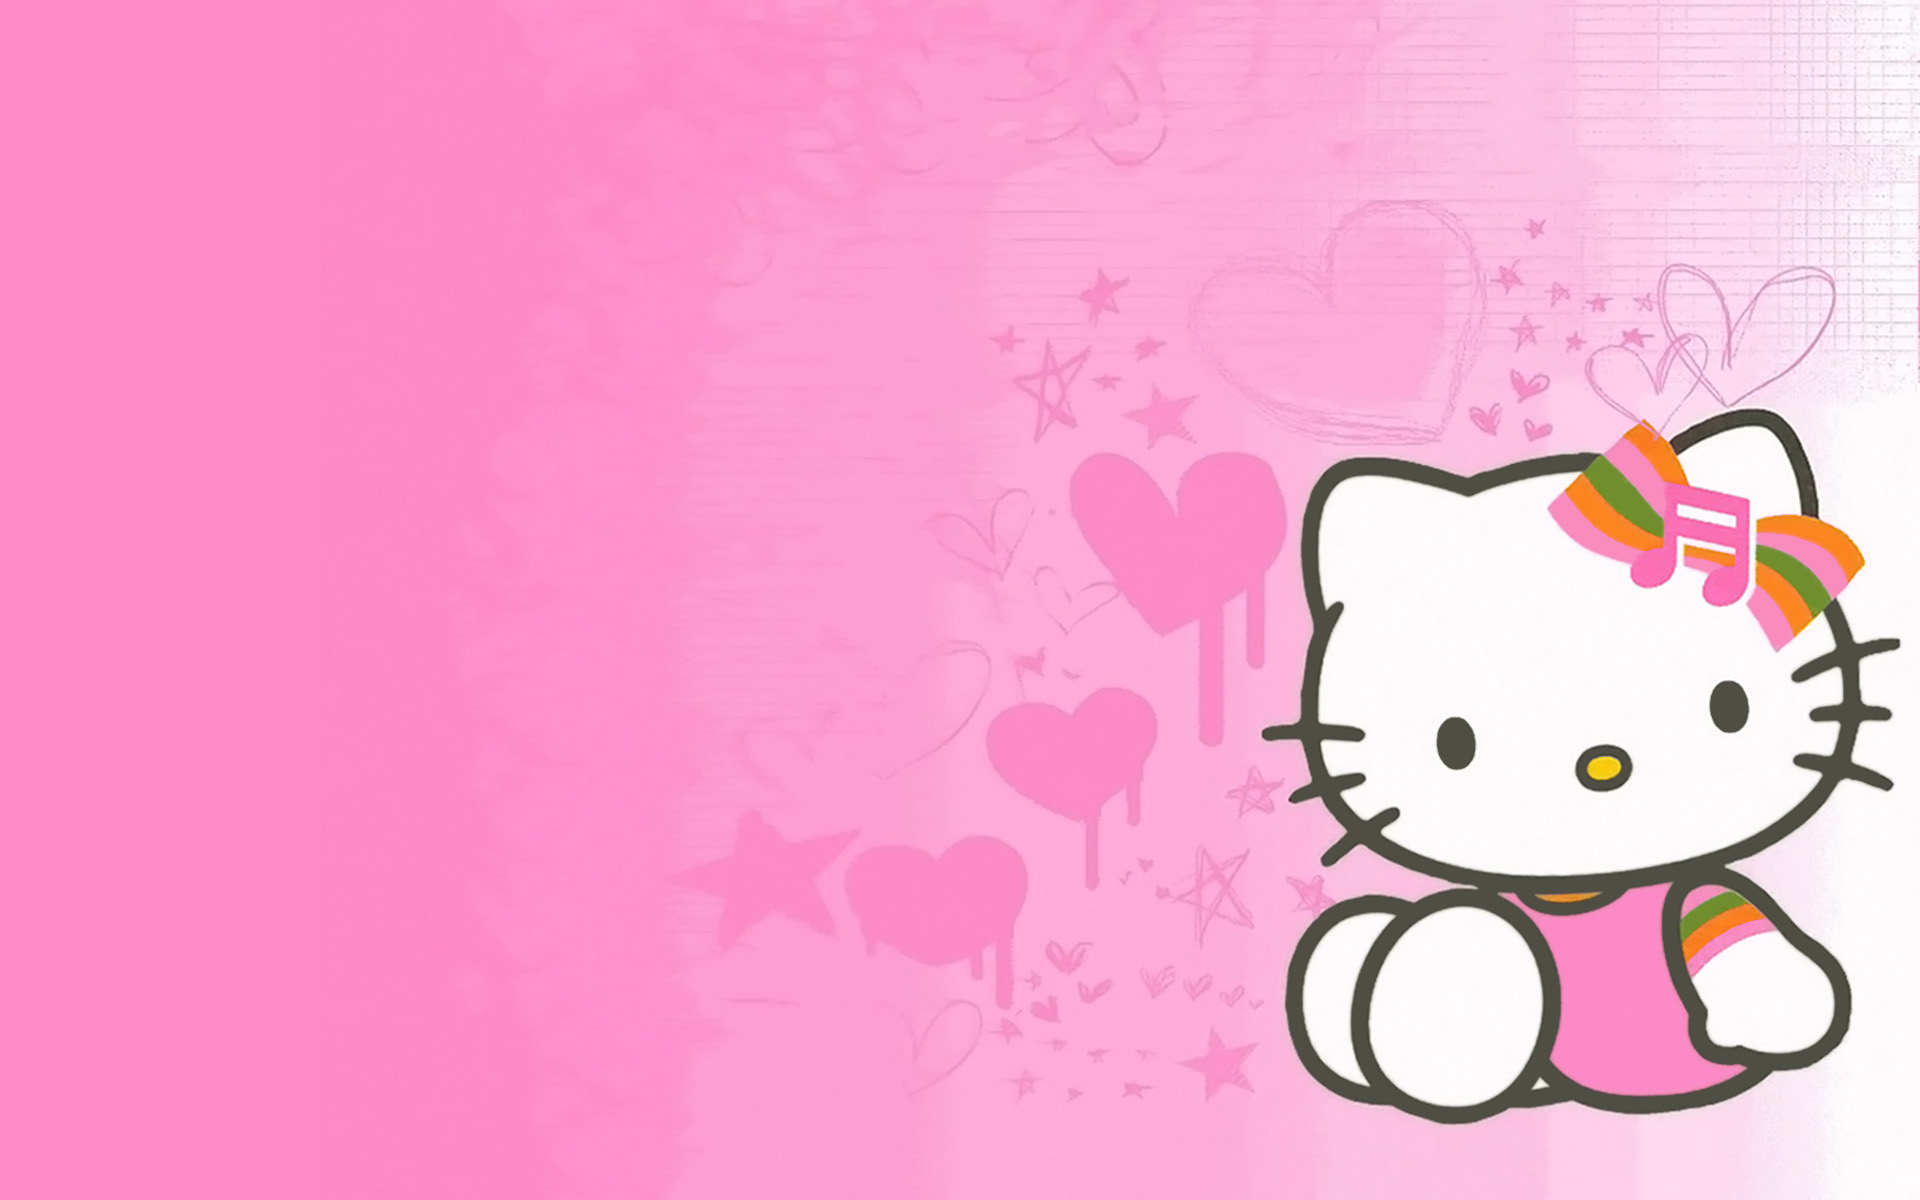 Pink Hello Kitty Wallpaper For Android